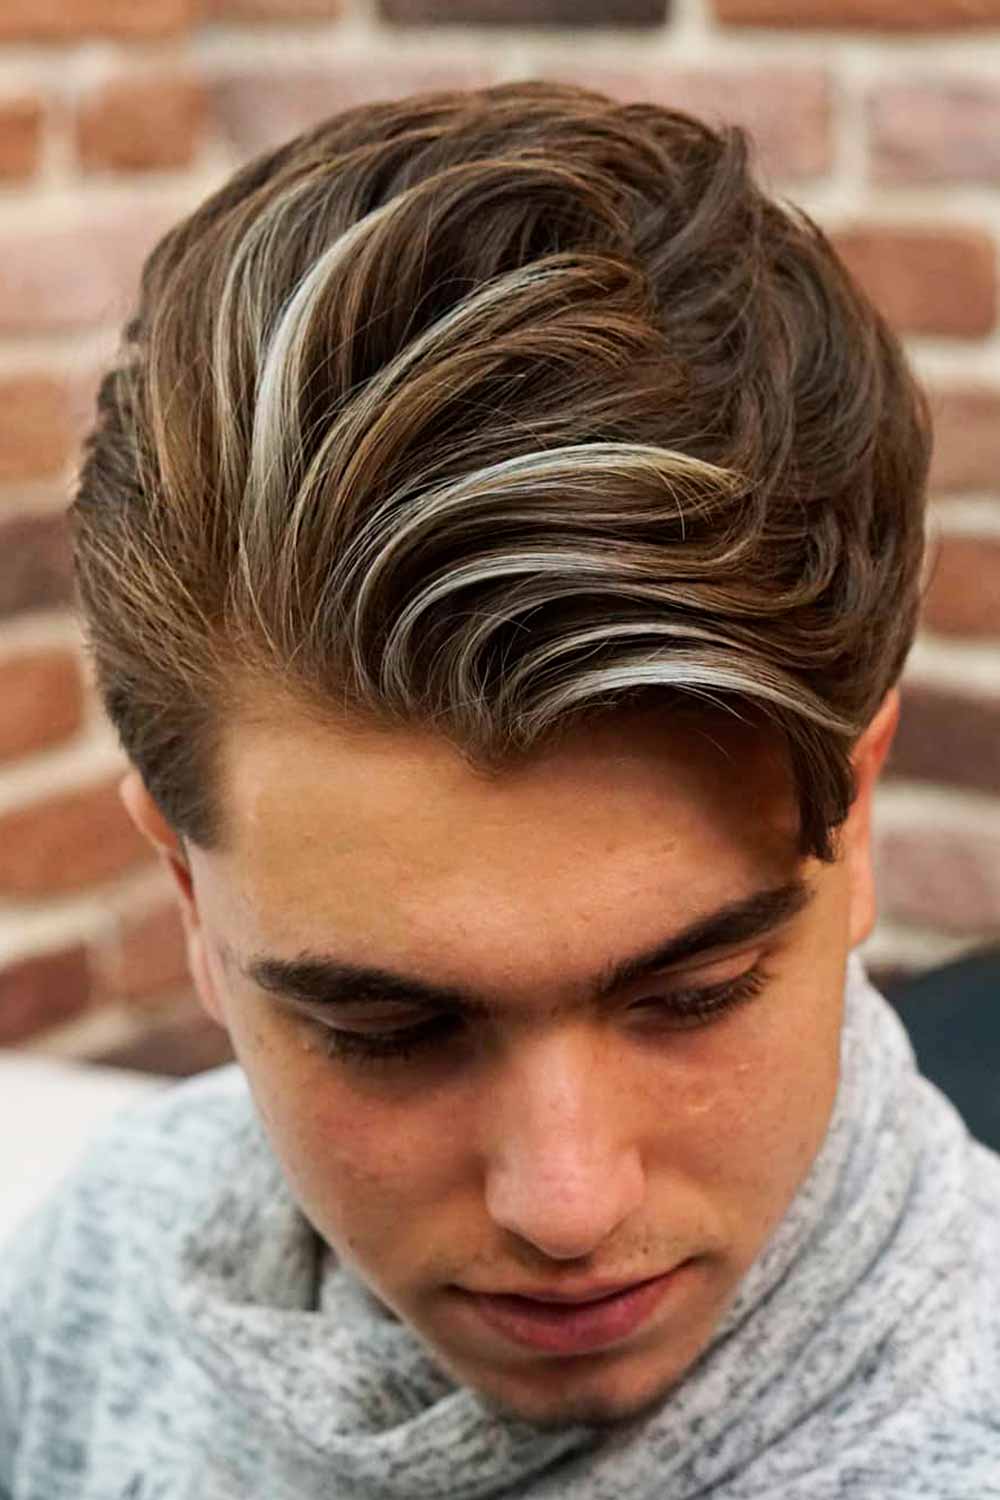 Tapered Sides with Long Comb Over #taper #taperhaircut #taperedhair #taperedhaircut